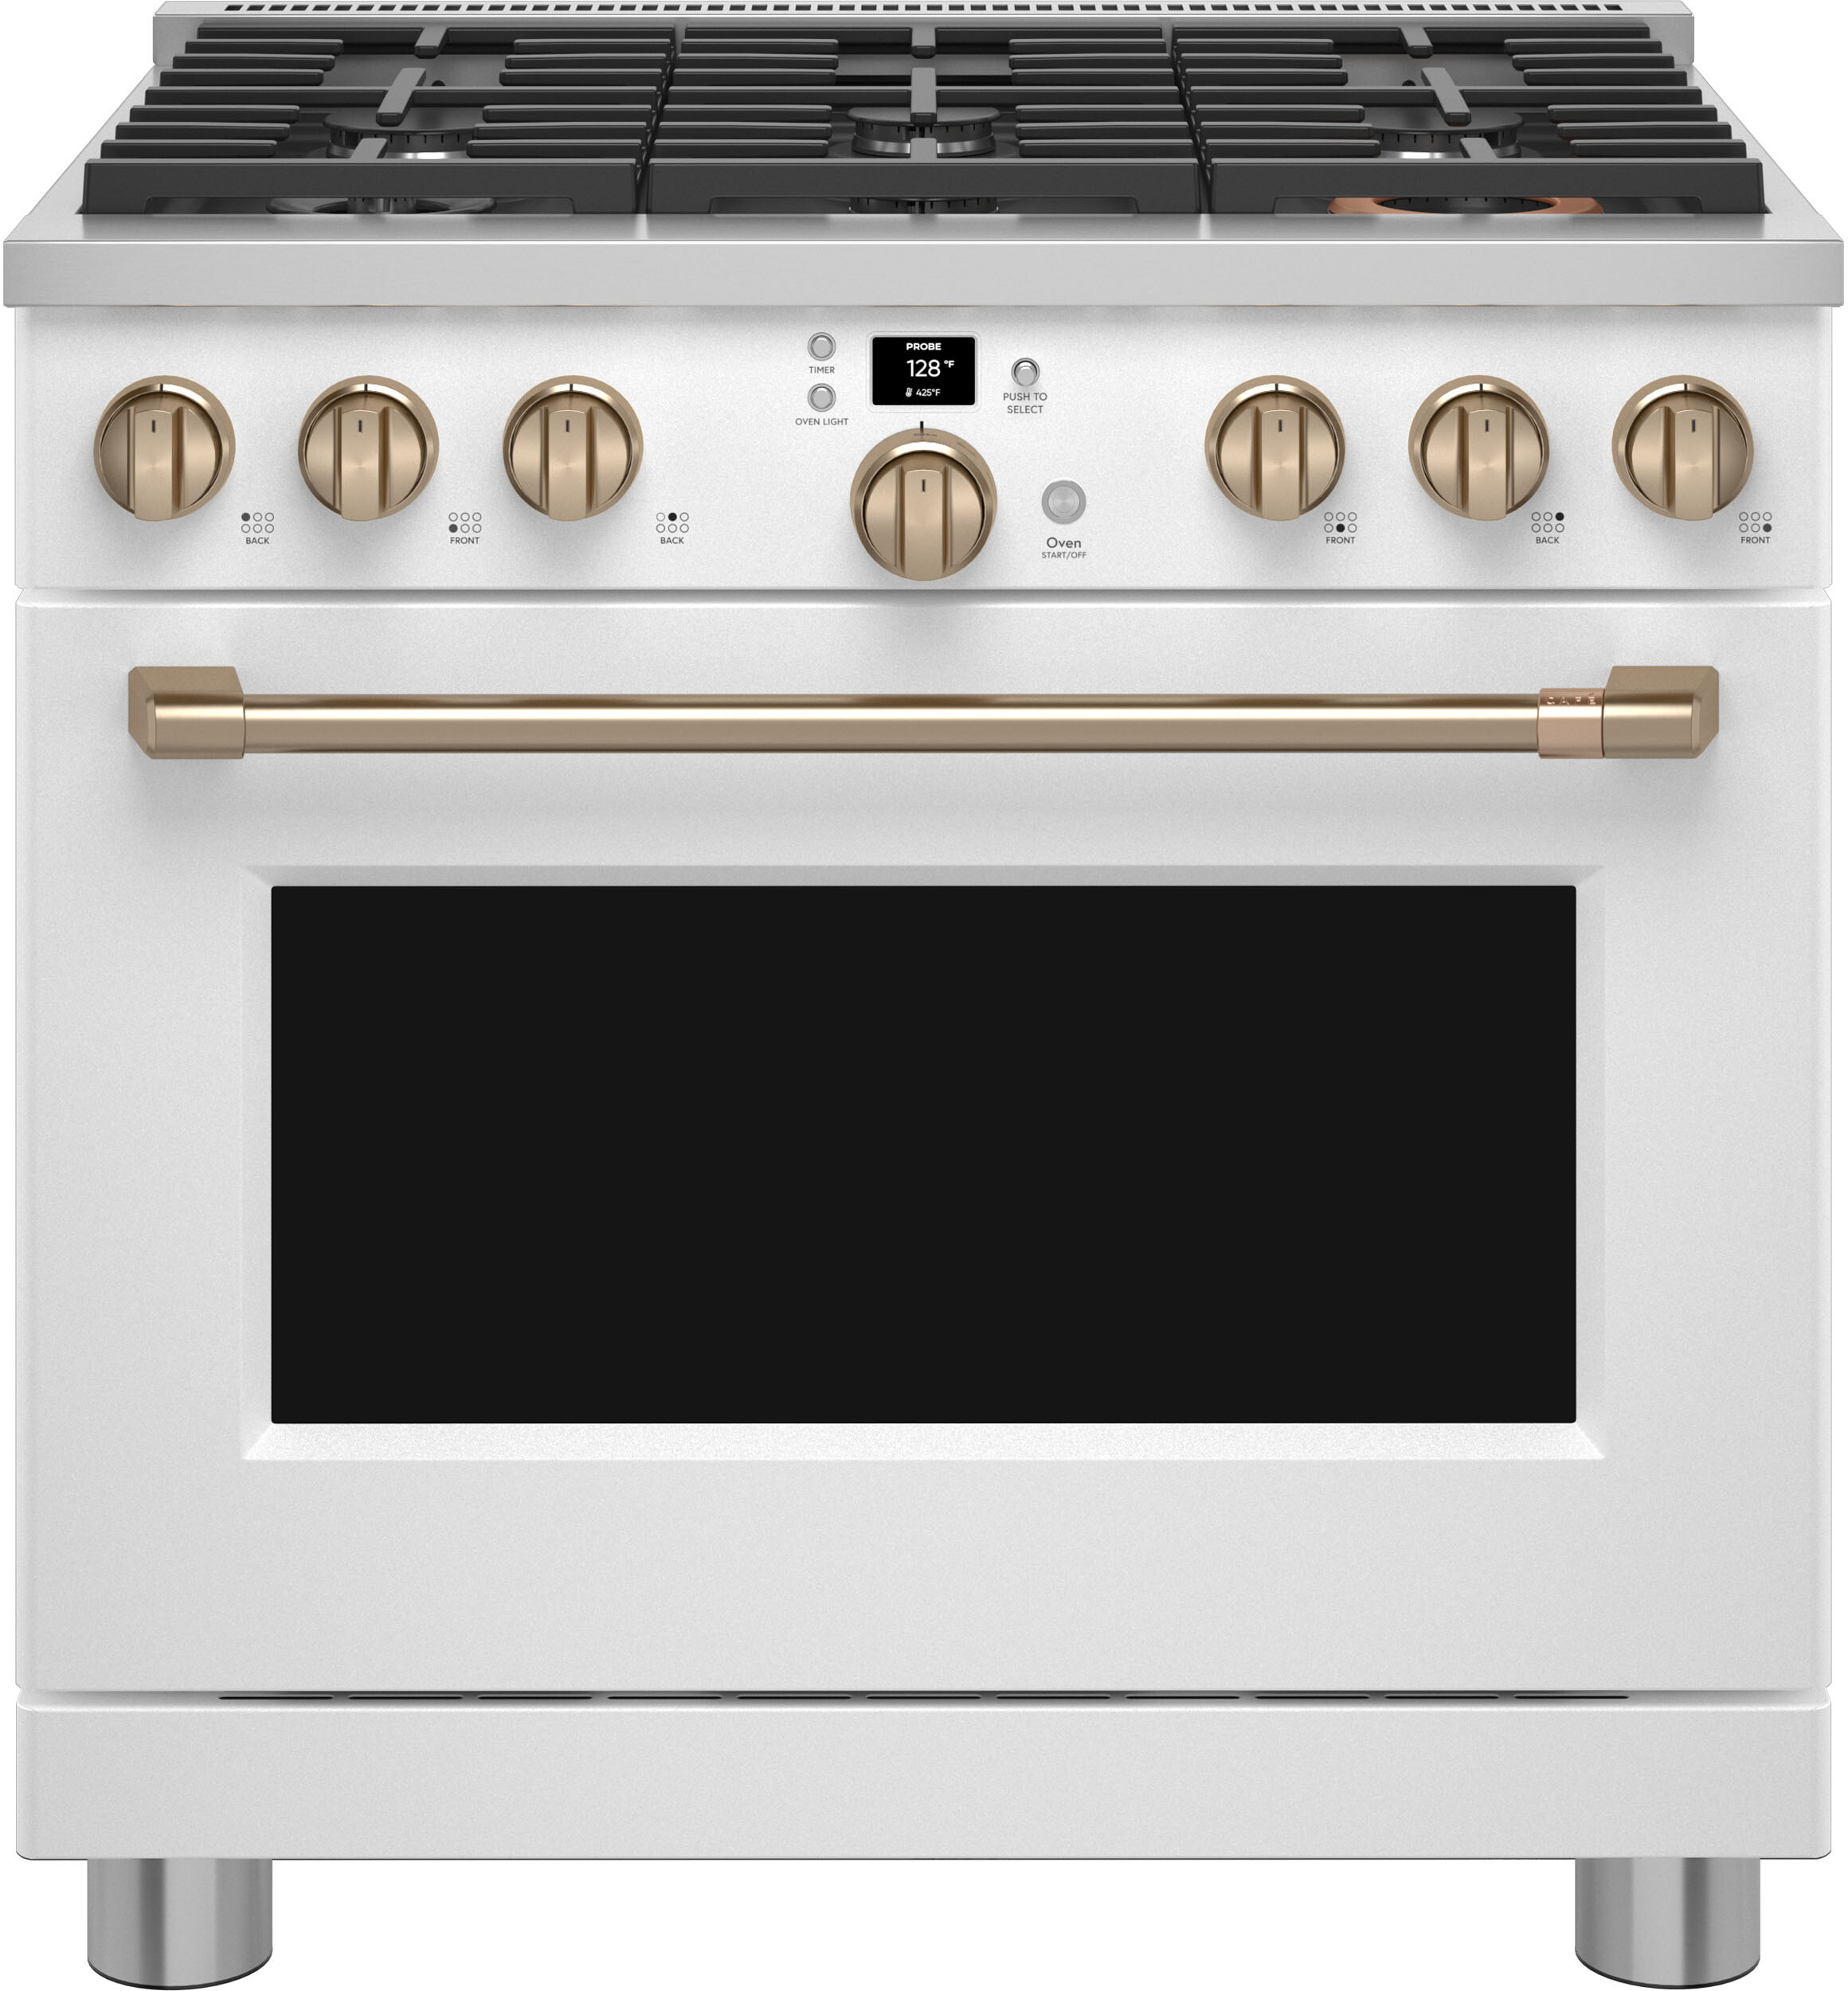 Professional 36"" Freestanding Natural Gas Range - Cafe CGY366P4TW2